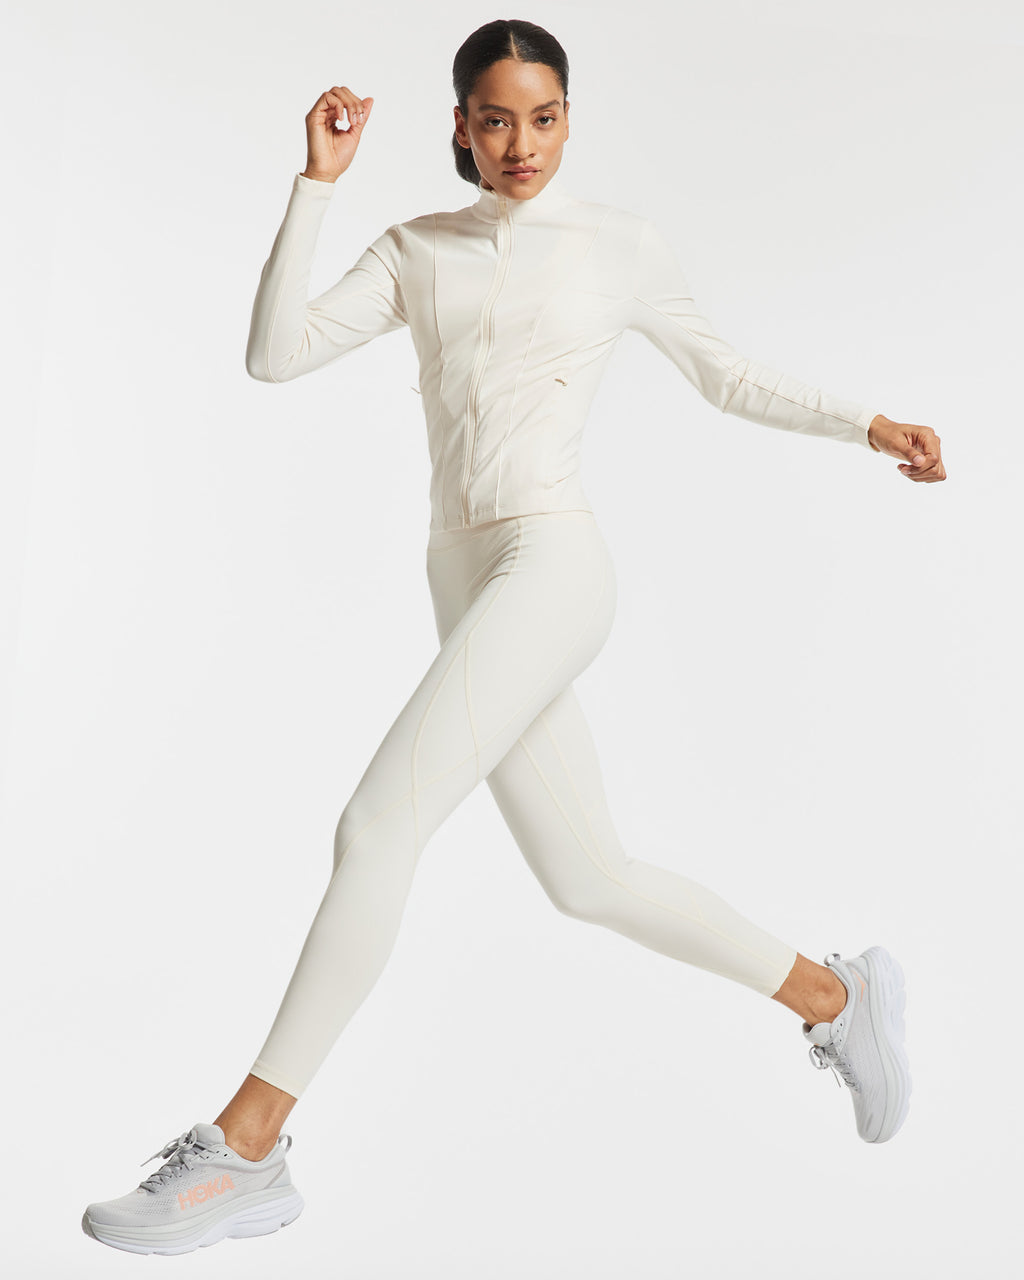 Woman wearing all white activewear and Hoka sneakers running in front of a white background.